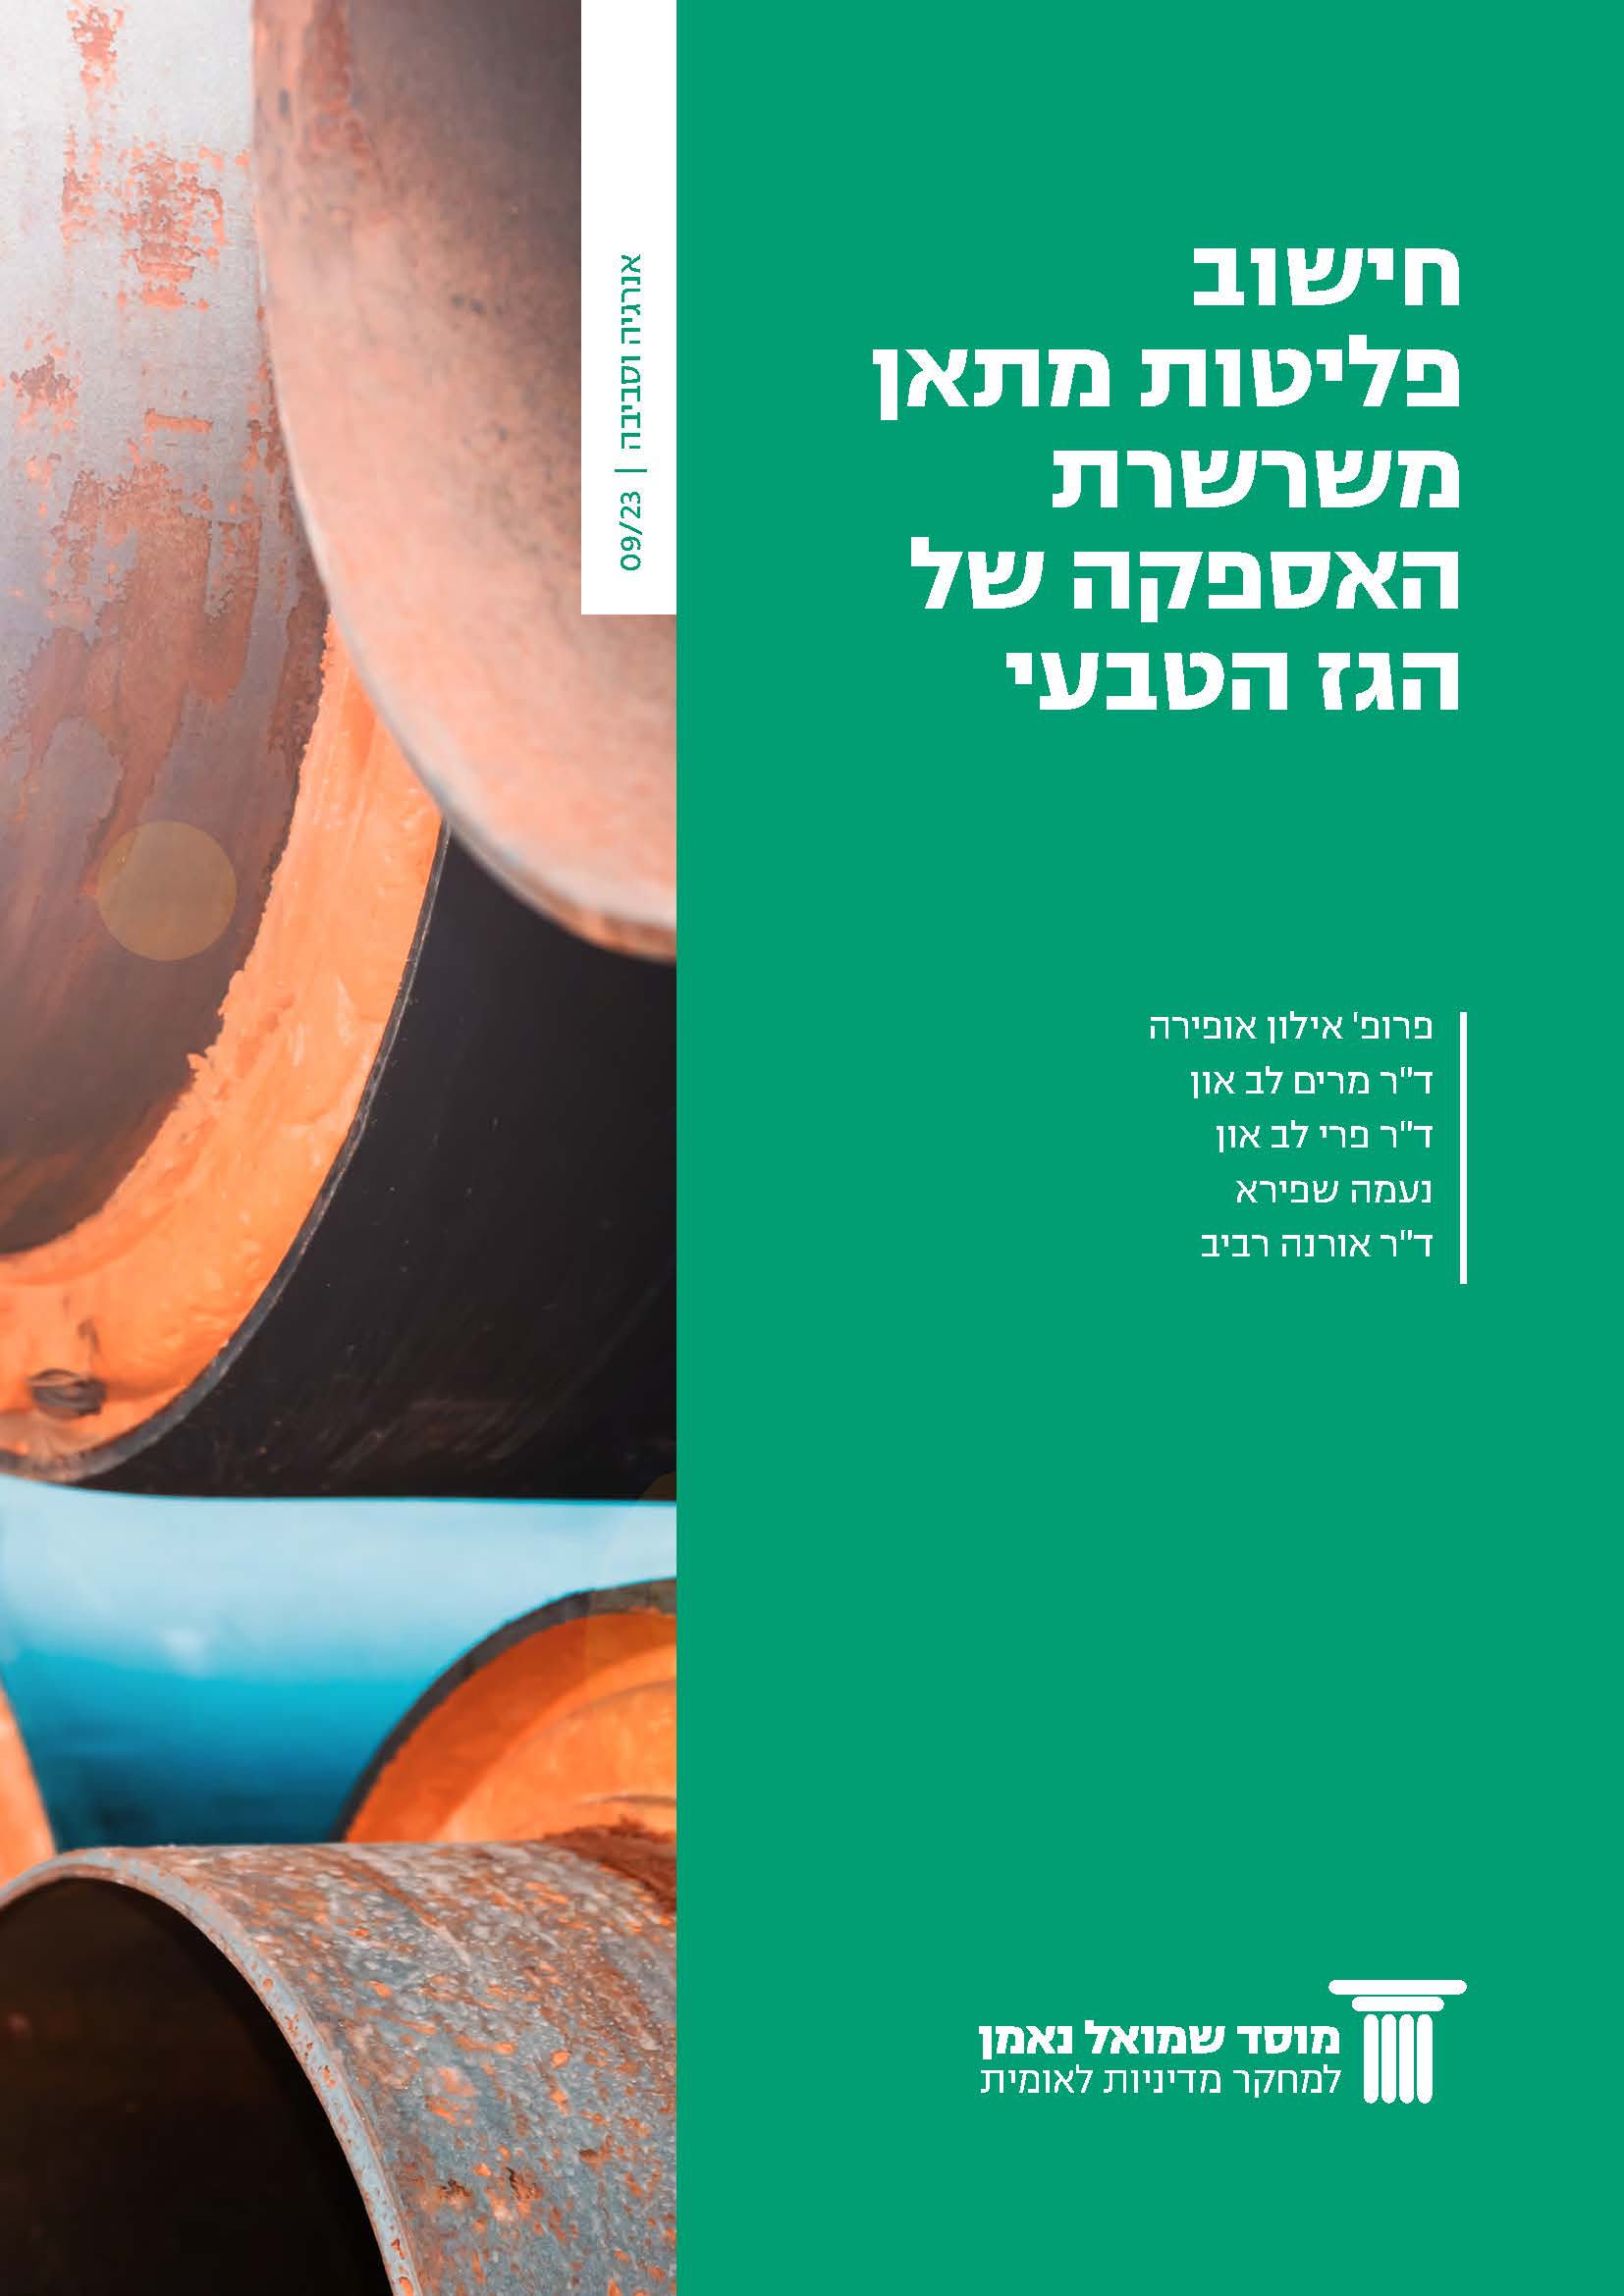 Assessment of Methane Emissions from Natural Gas Supply Chain in Israel